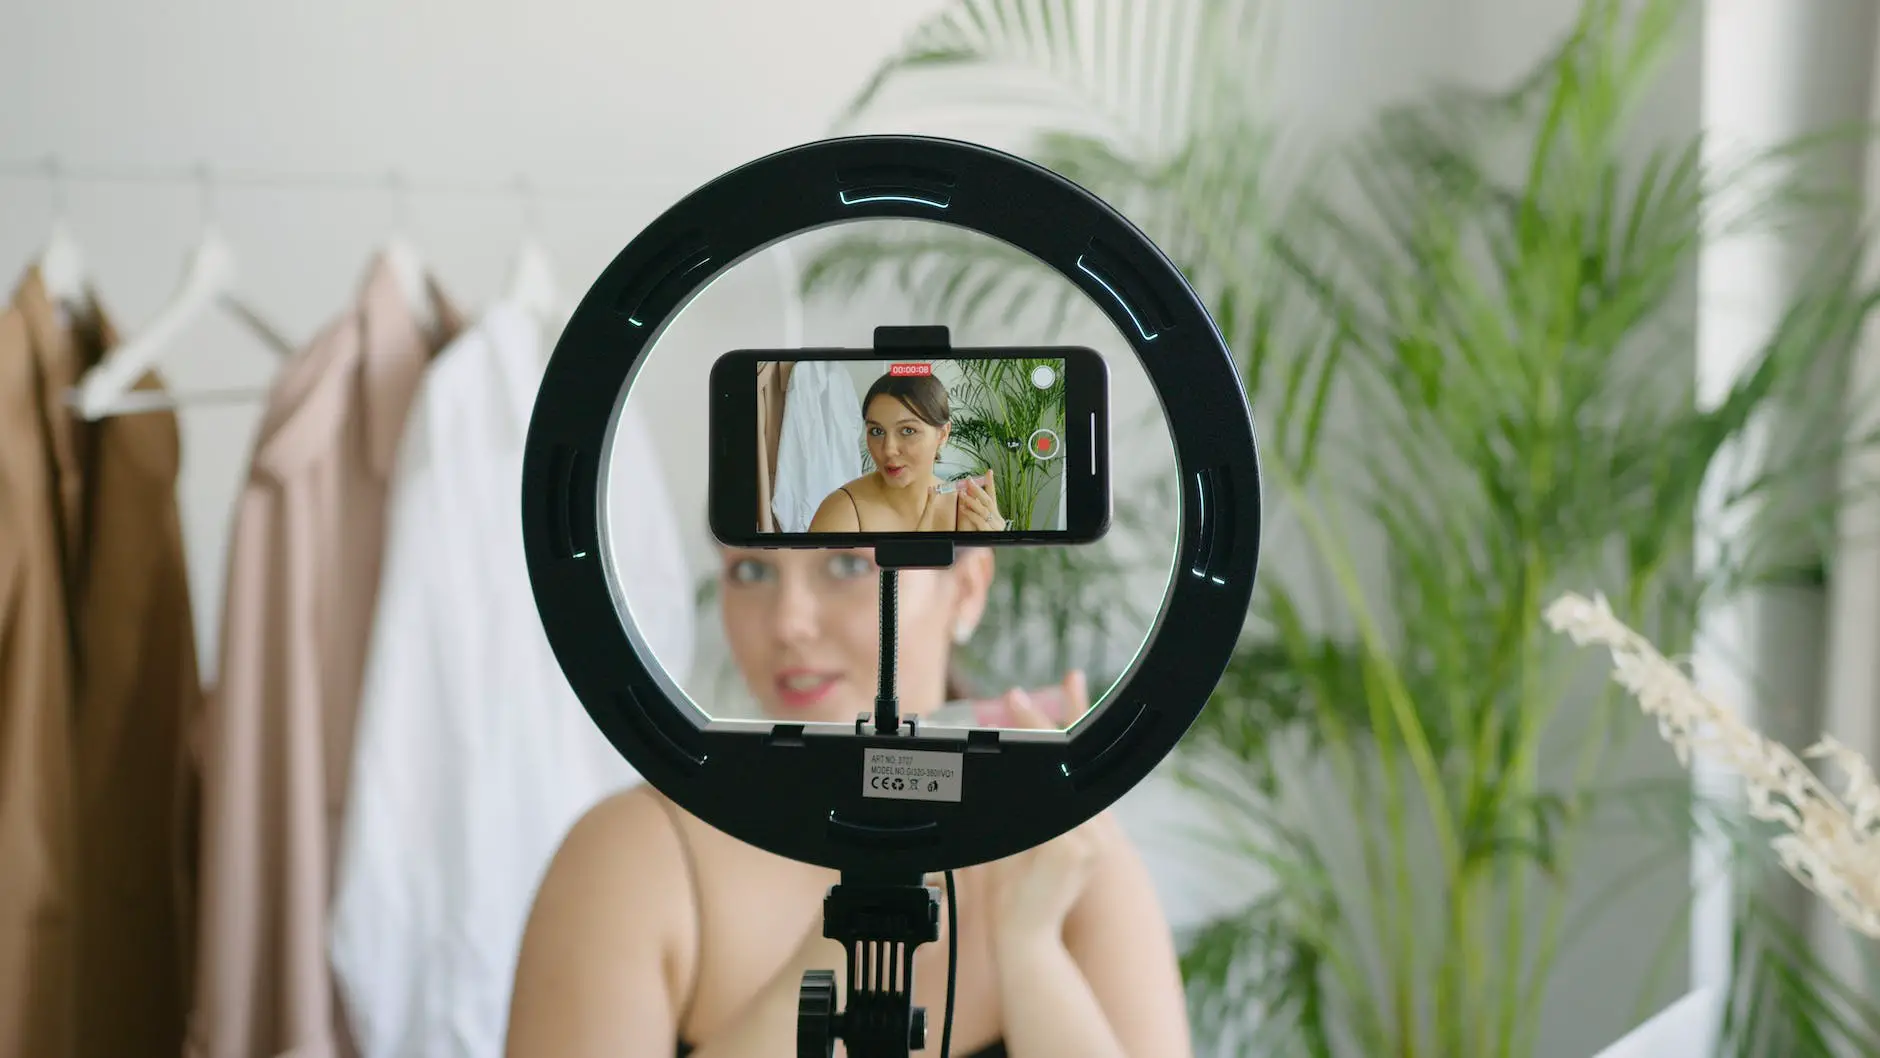 a woman video recording herself using a cellphone camera